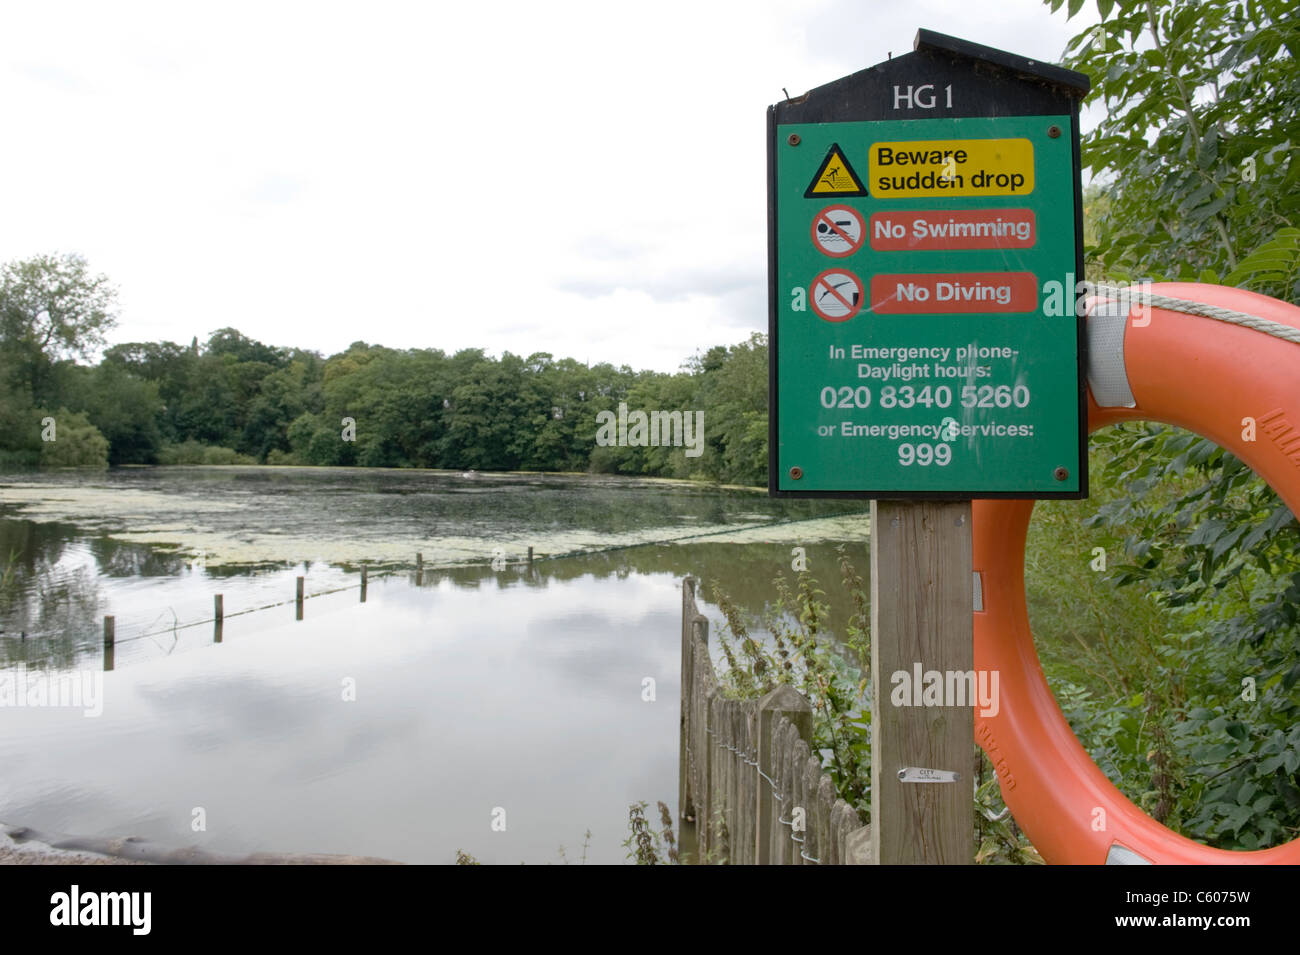 London Parliament Hill Hampstead Heath Highgate no. 1 pond with warning notice beware sudden drop no swimming no diving safety ring emergency number Stock Photo